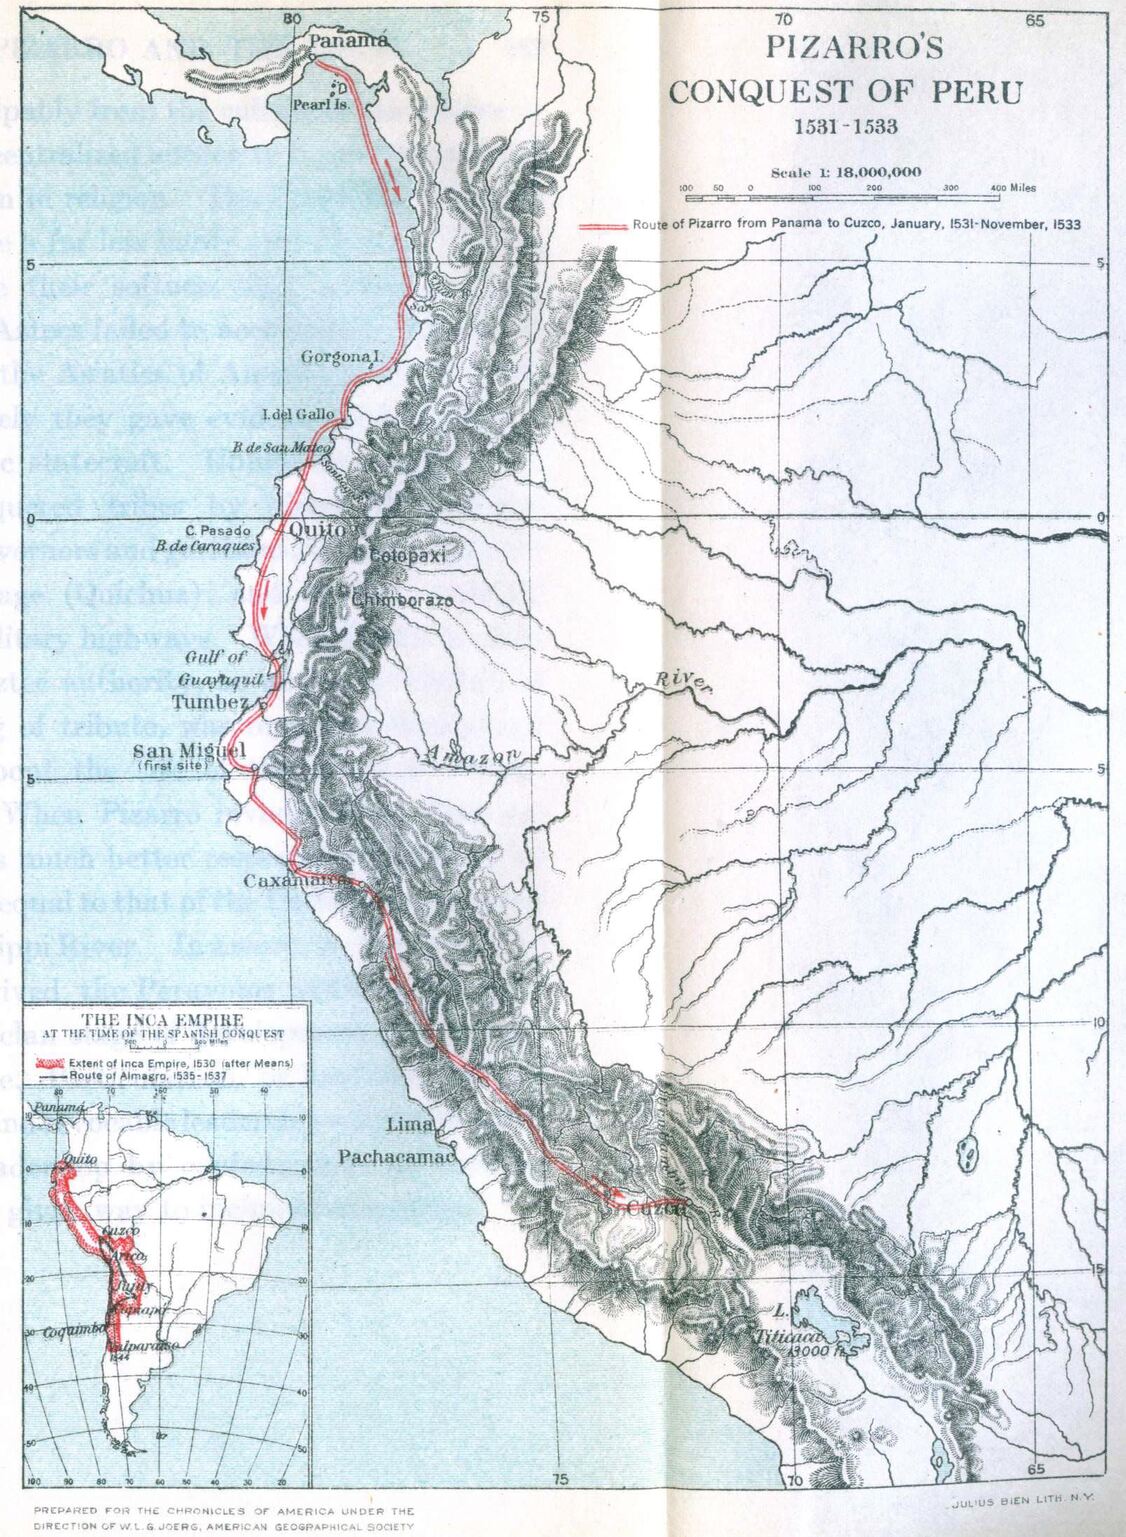 The route taken by Pizarro (in red) during his conquest of Peru